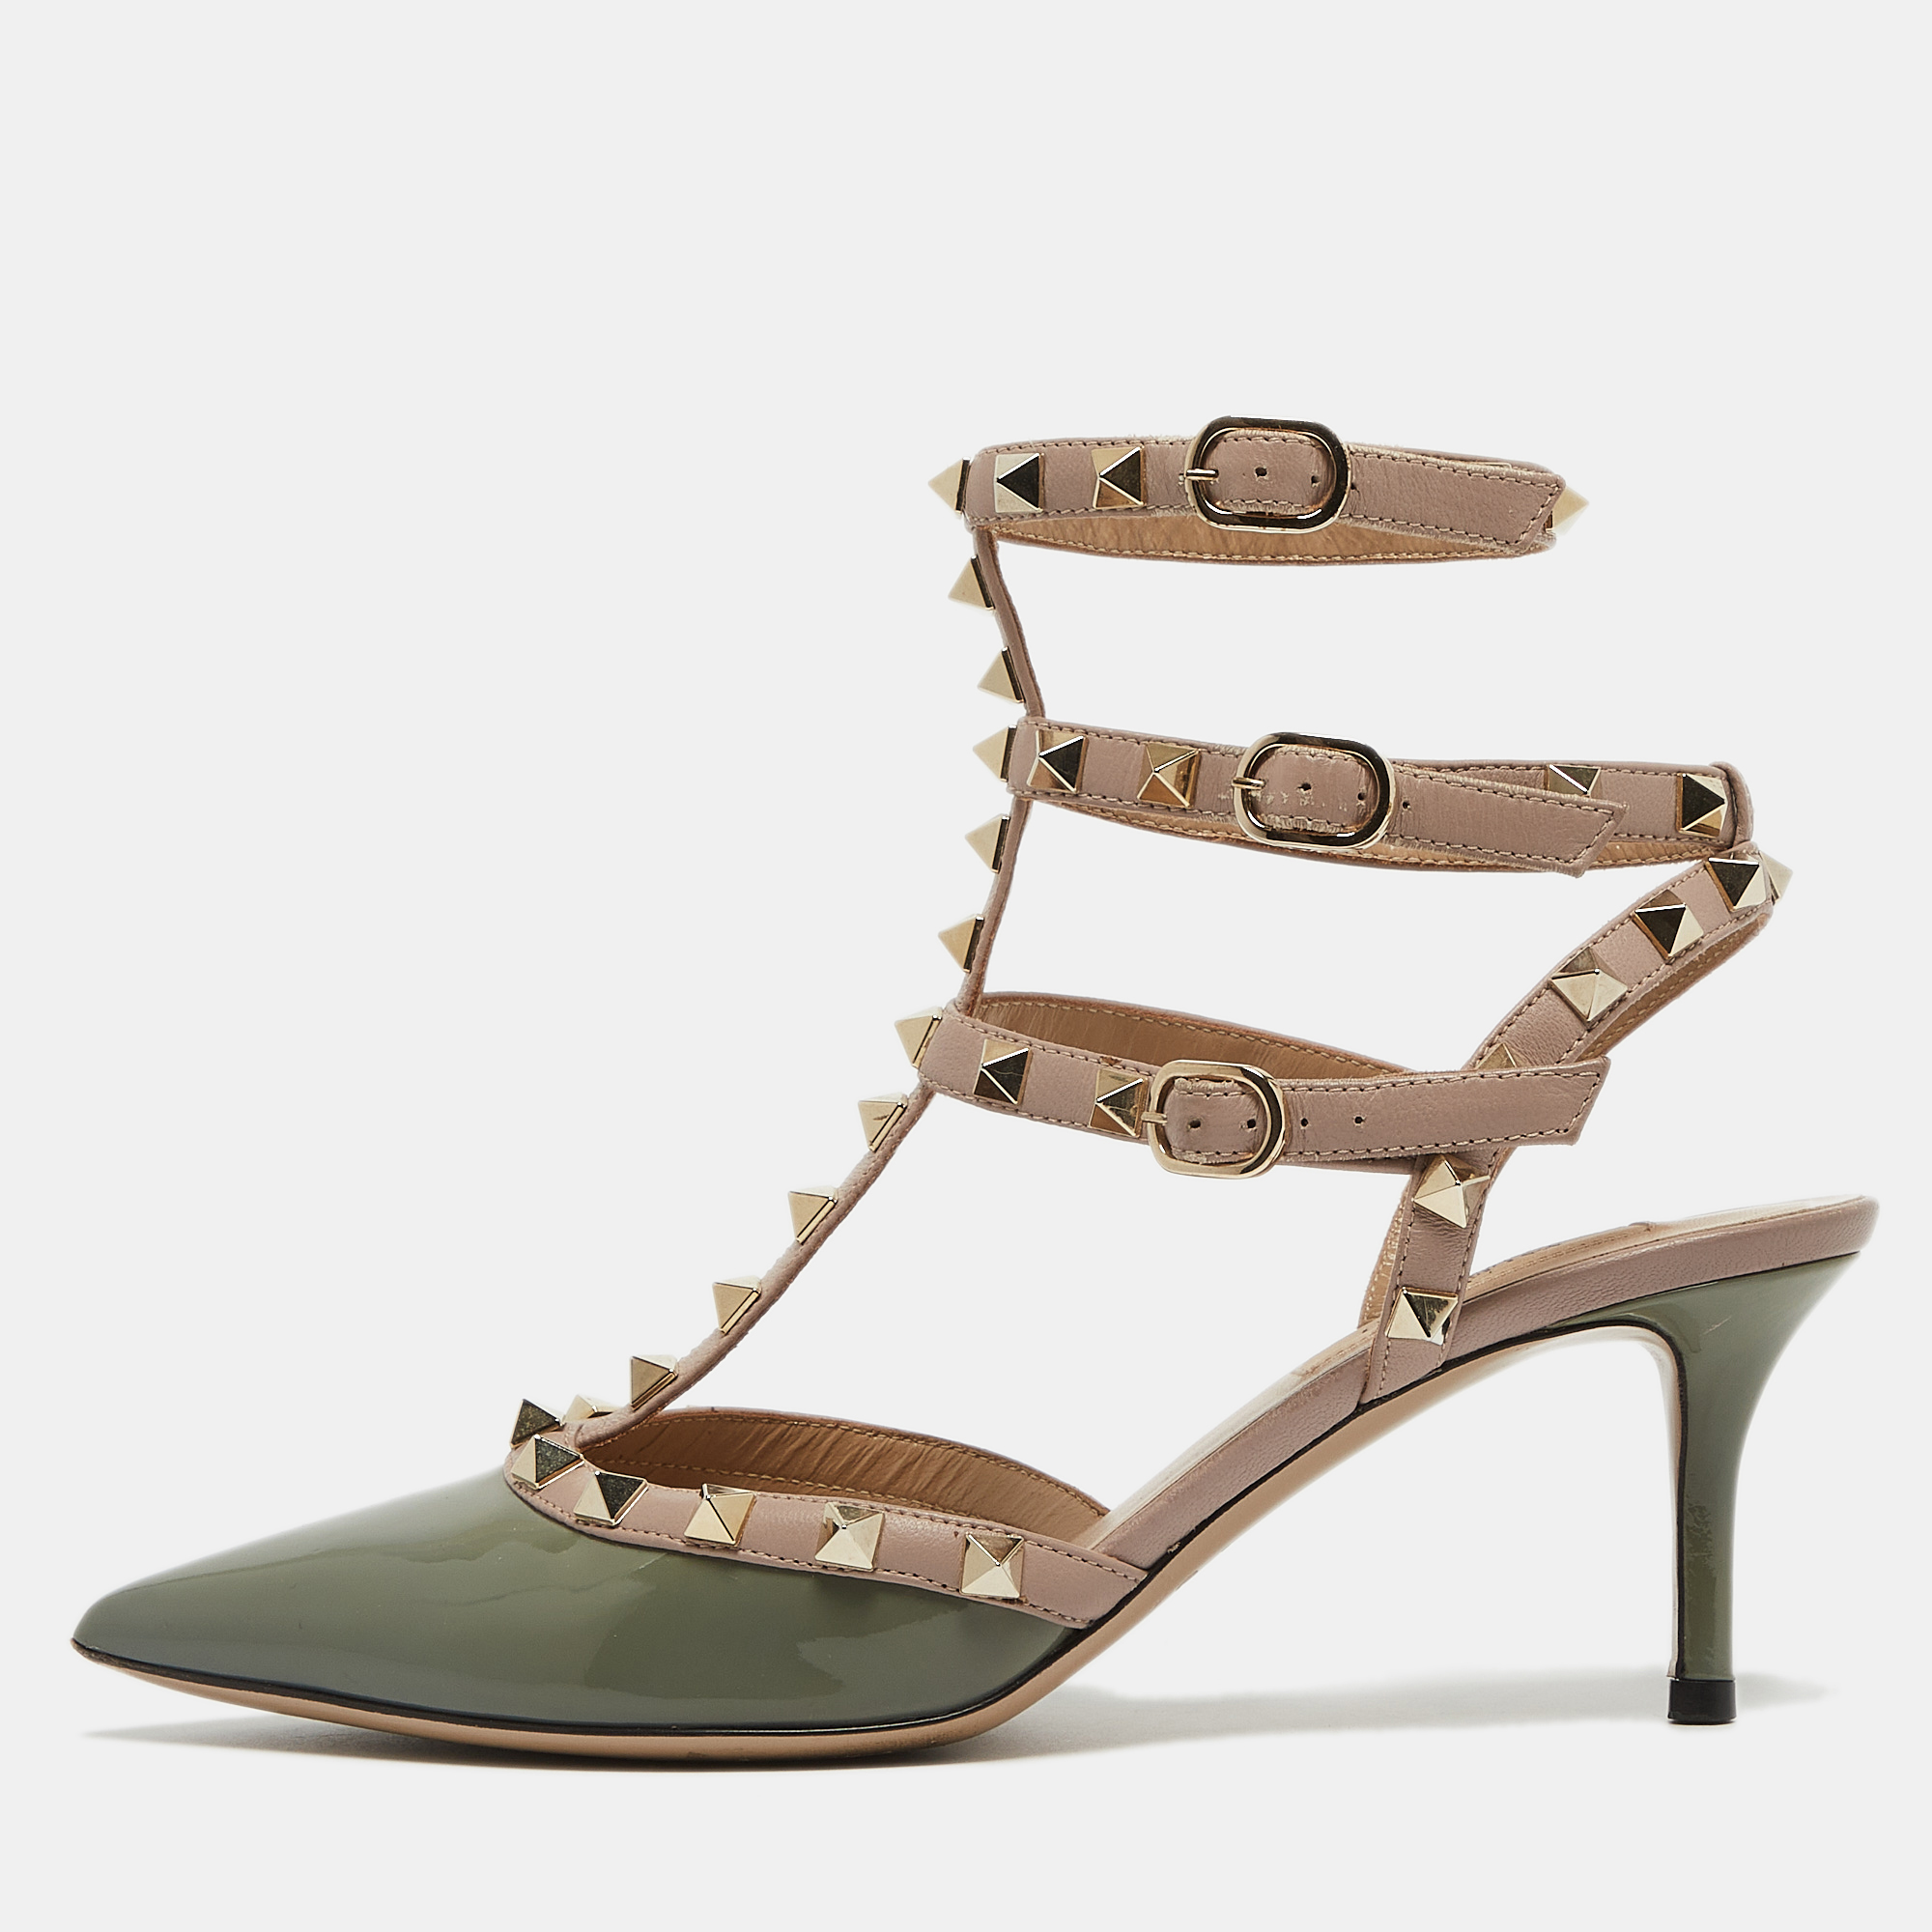 Valentino green/beige patent and leather rockstud cage pumps size 37